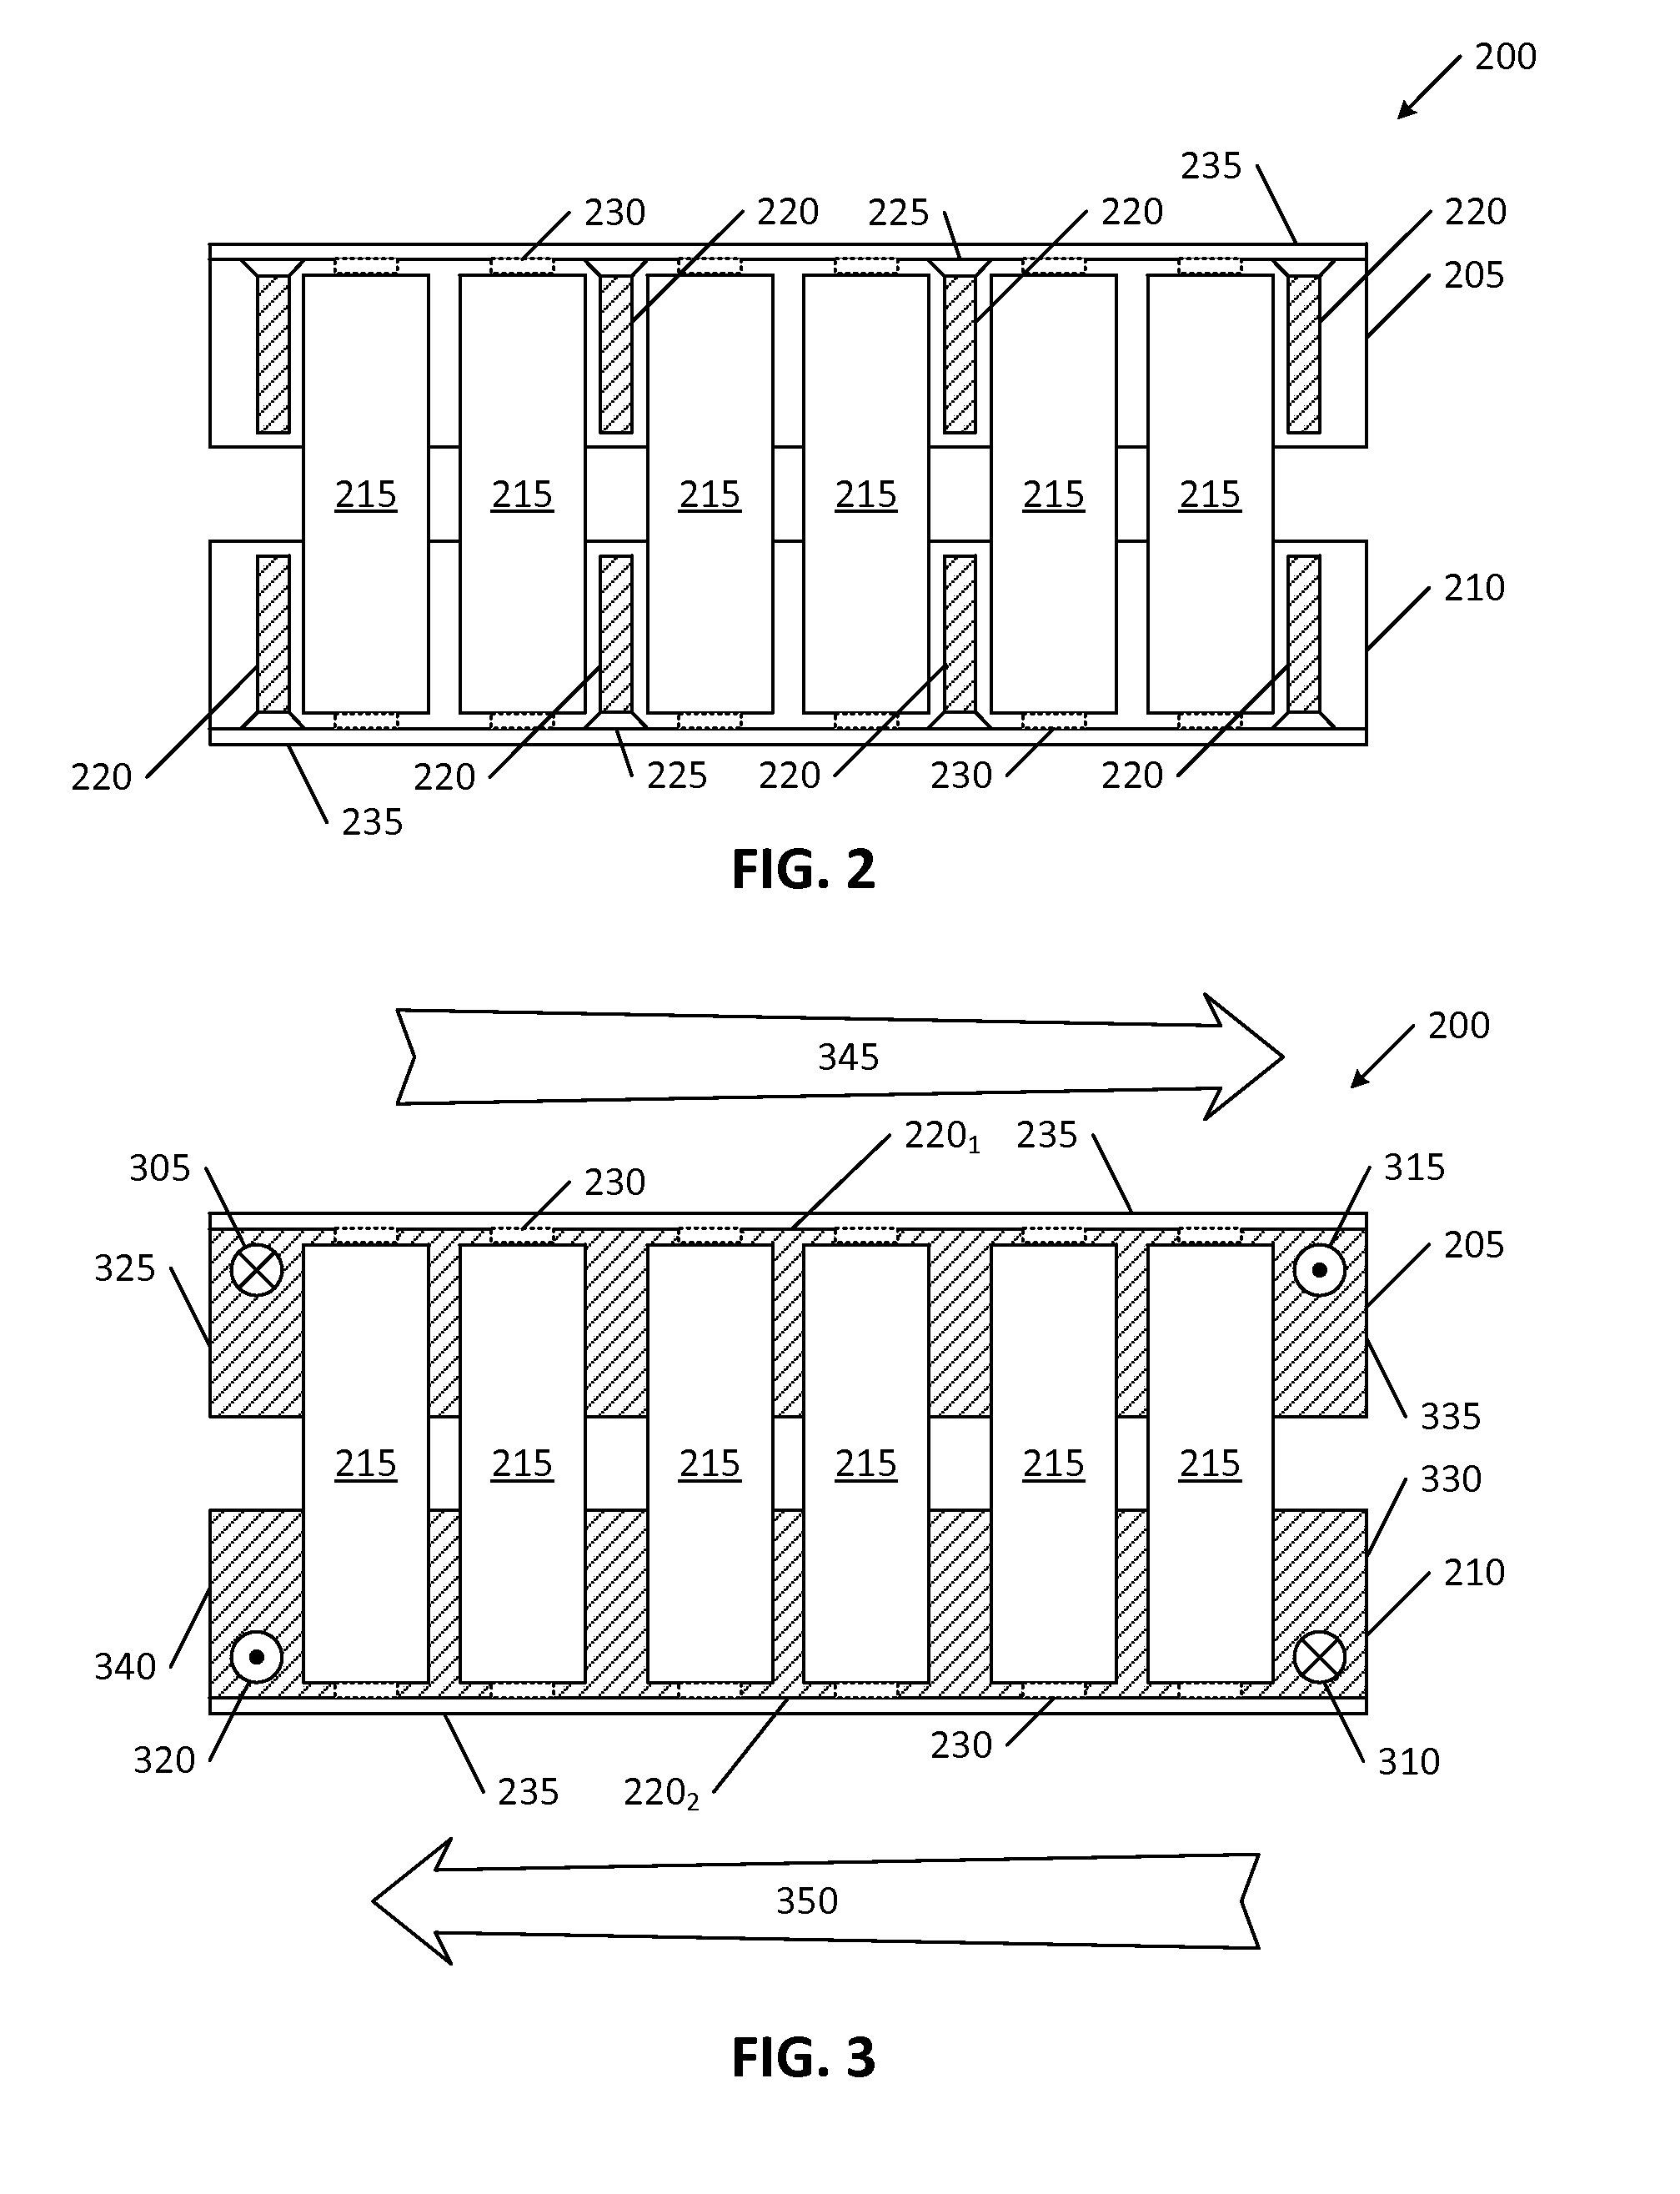 Battery module with integrated thermal management system